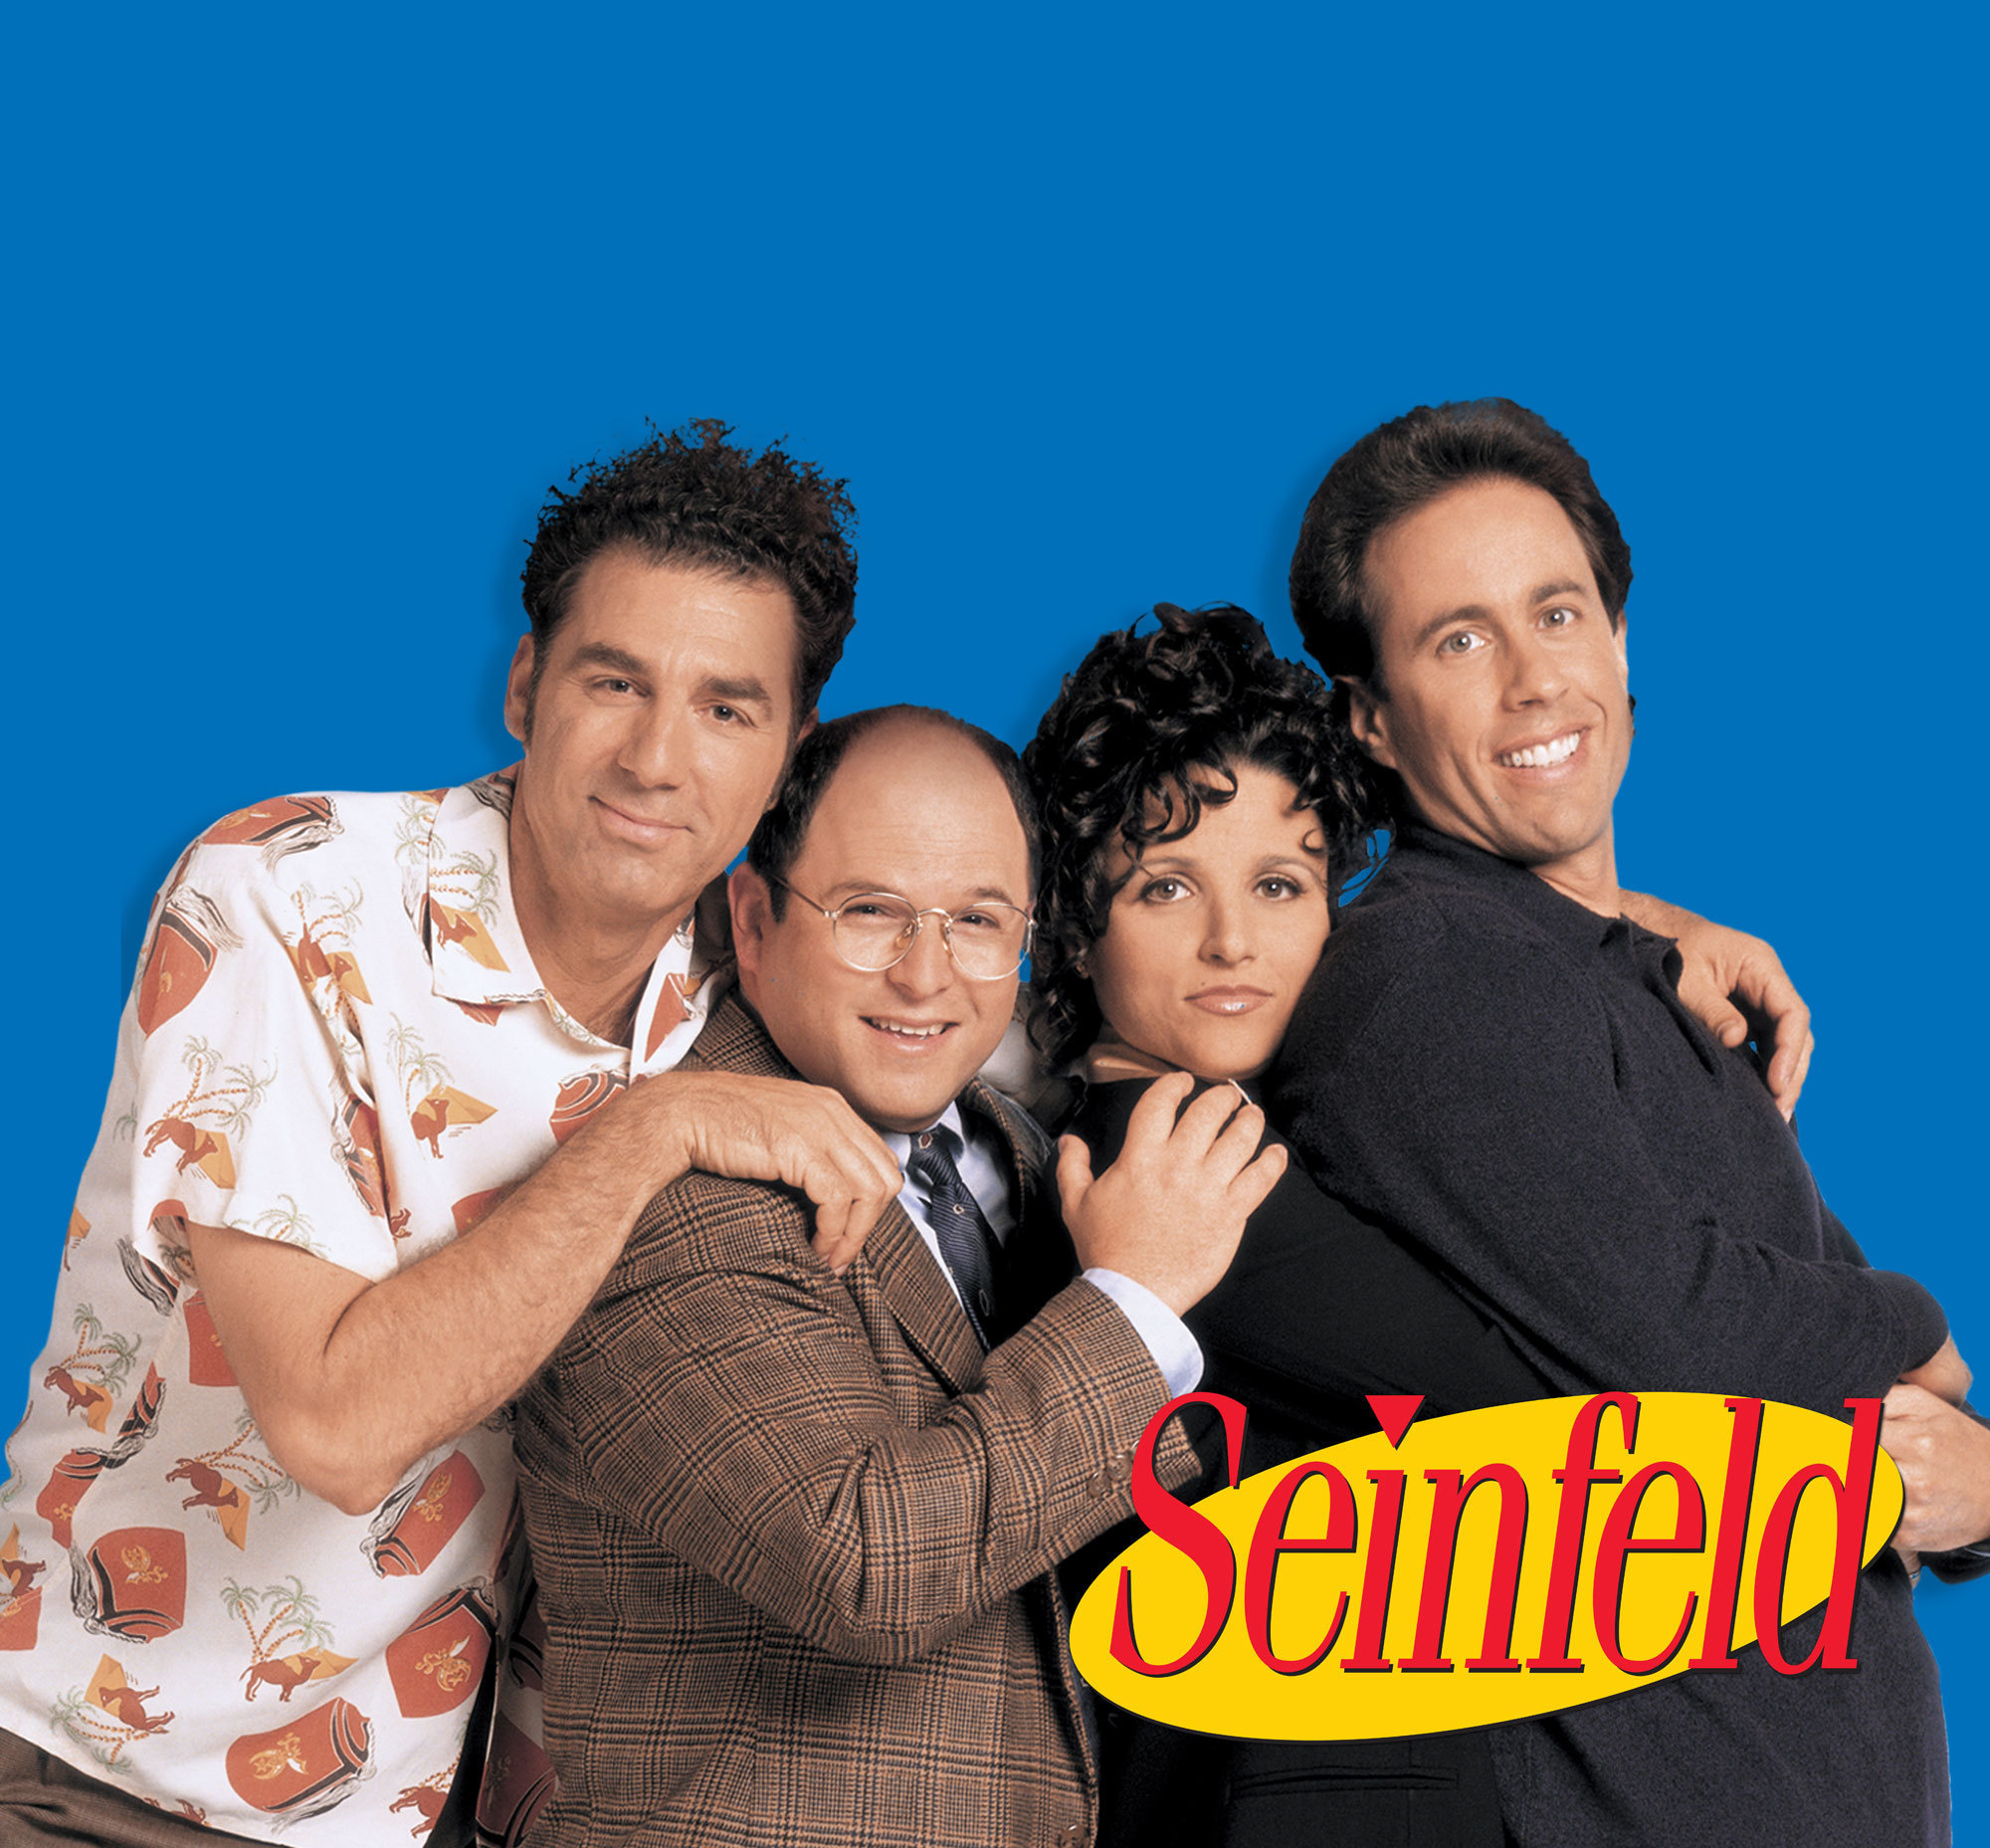 Seinfeld may have been recorded in front of a live studio audience, but the theme song was a little more complicated.
Since the opening monologue kept getting in the way, the studio couldn't just plug in the theme song in every episode. Instead they had to re-record it every single time for all 180 episodes across 9 seasons.